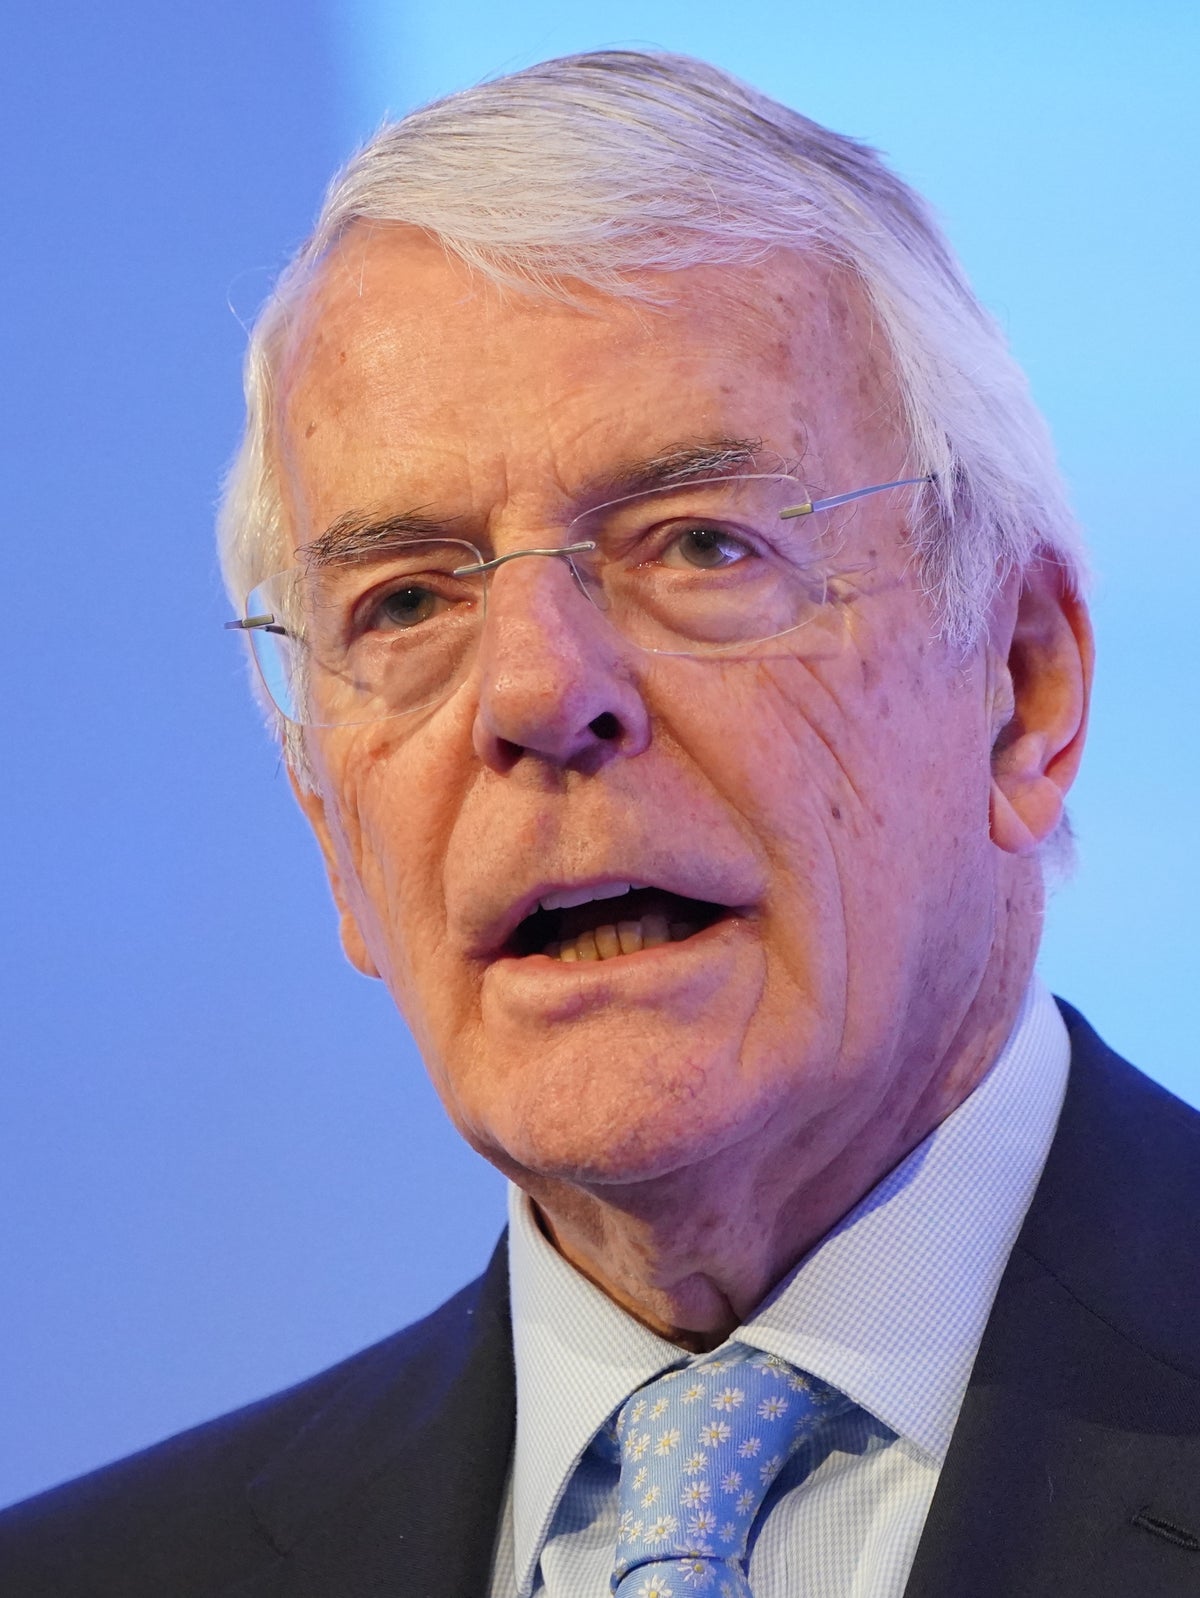 John Major urges Jeremy Hunt to prioritise defence spending over tax cuts in Budget